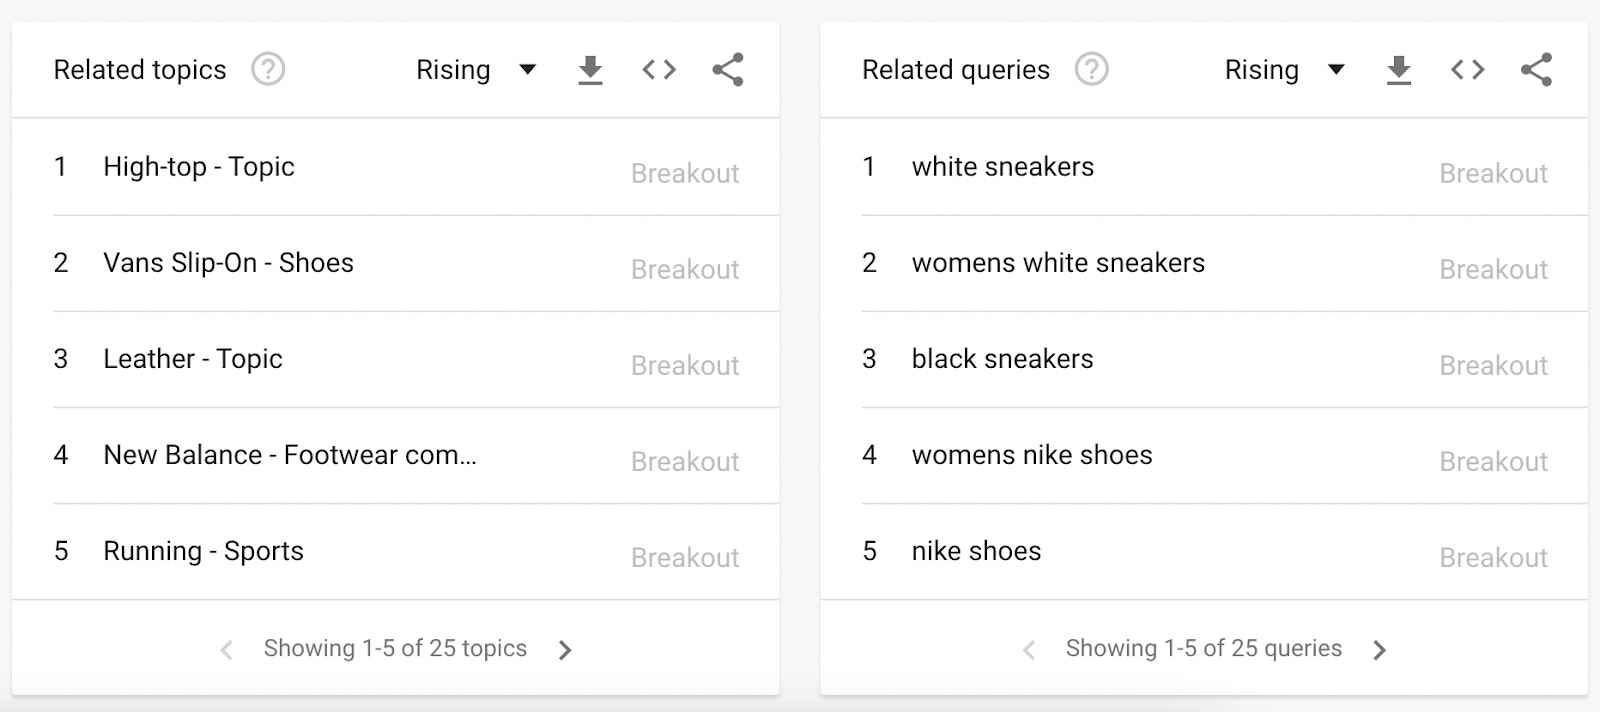 “White sneakers,” “black sneakers,” and “women’s Nike shoes” are all breakout terms for the phrase “women’s sneakers.”